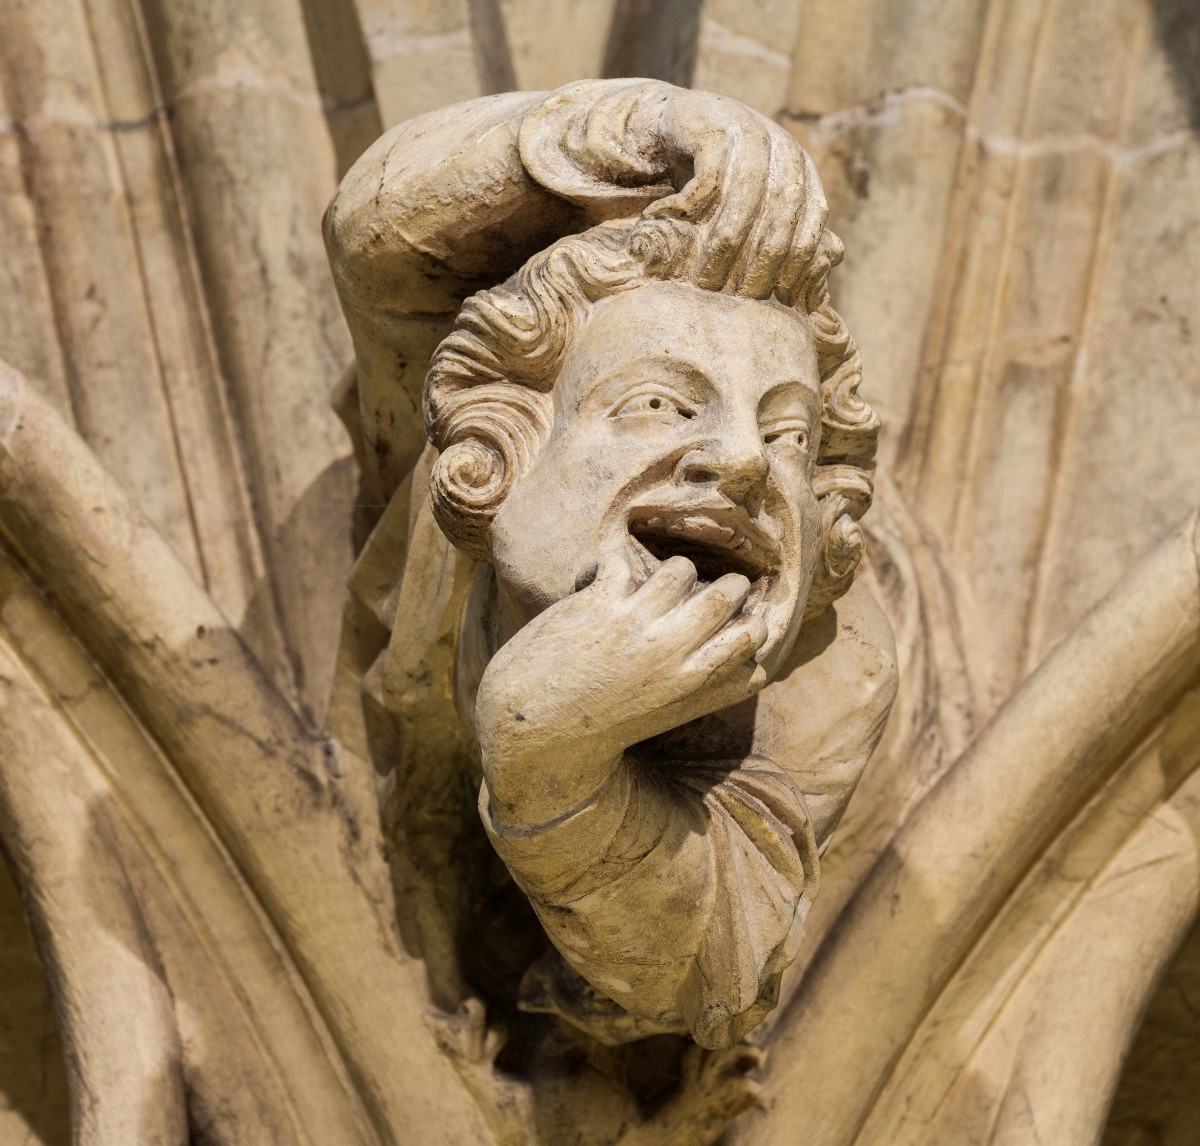 Grotesque on the wall of the chapter house. Credit David Iliff